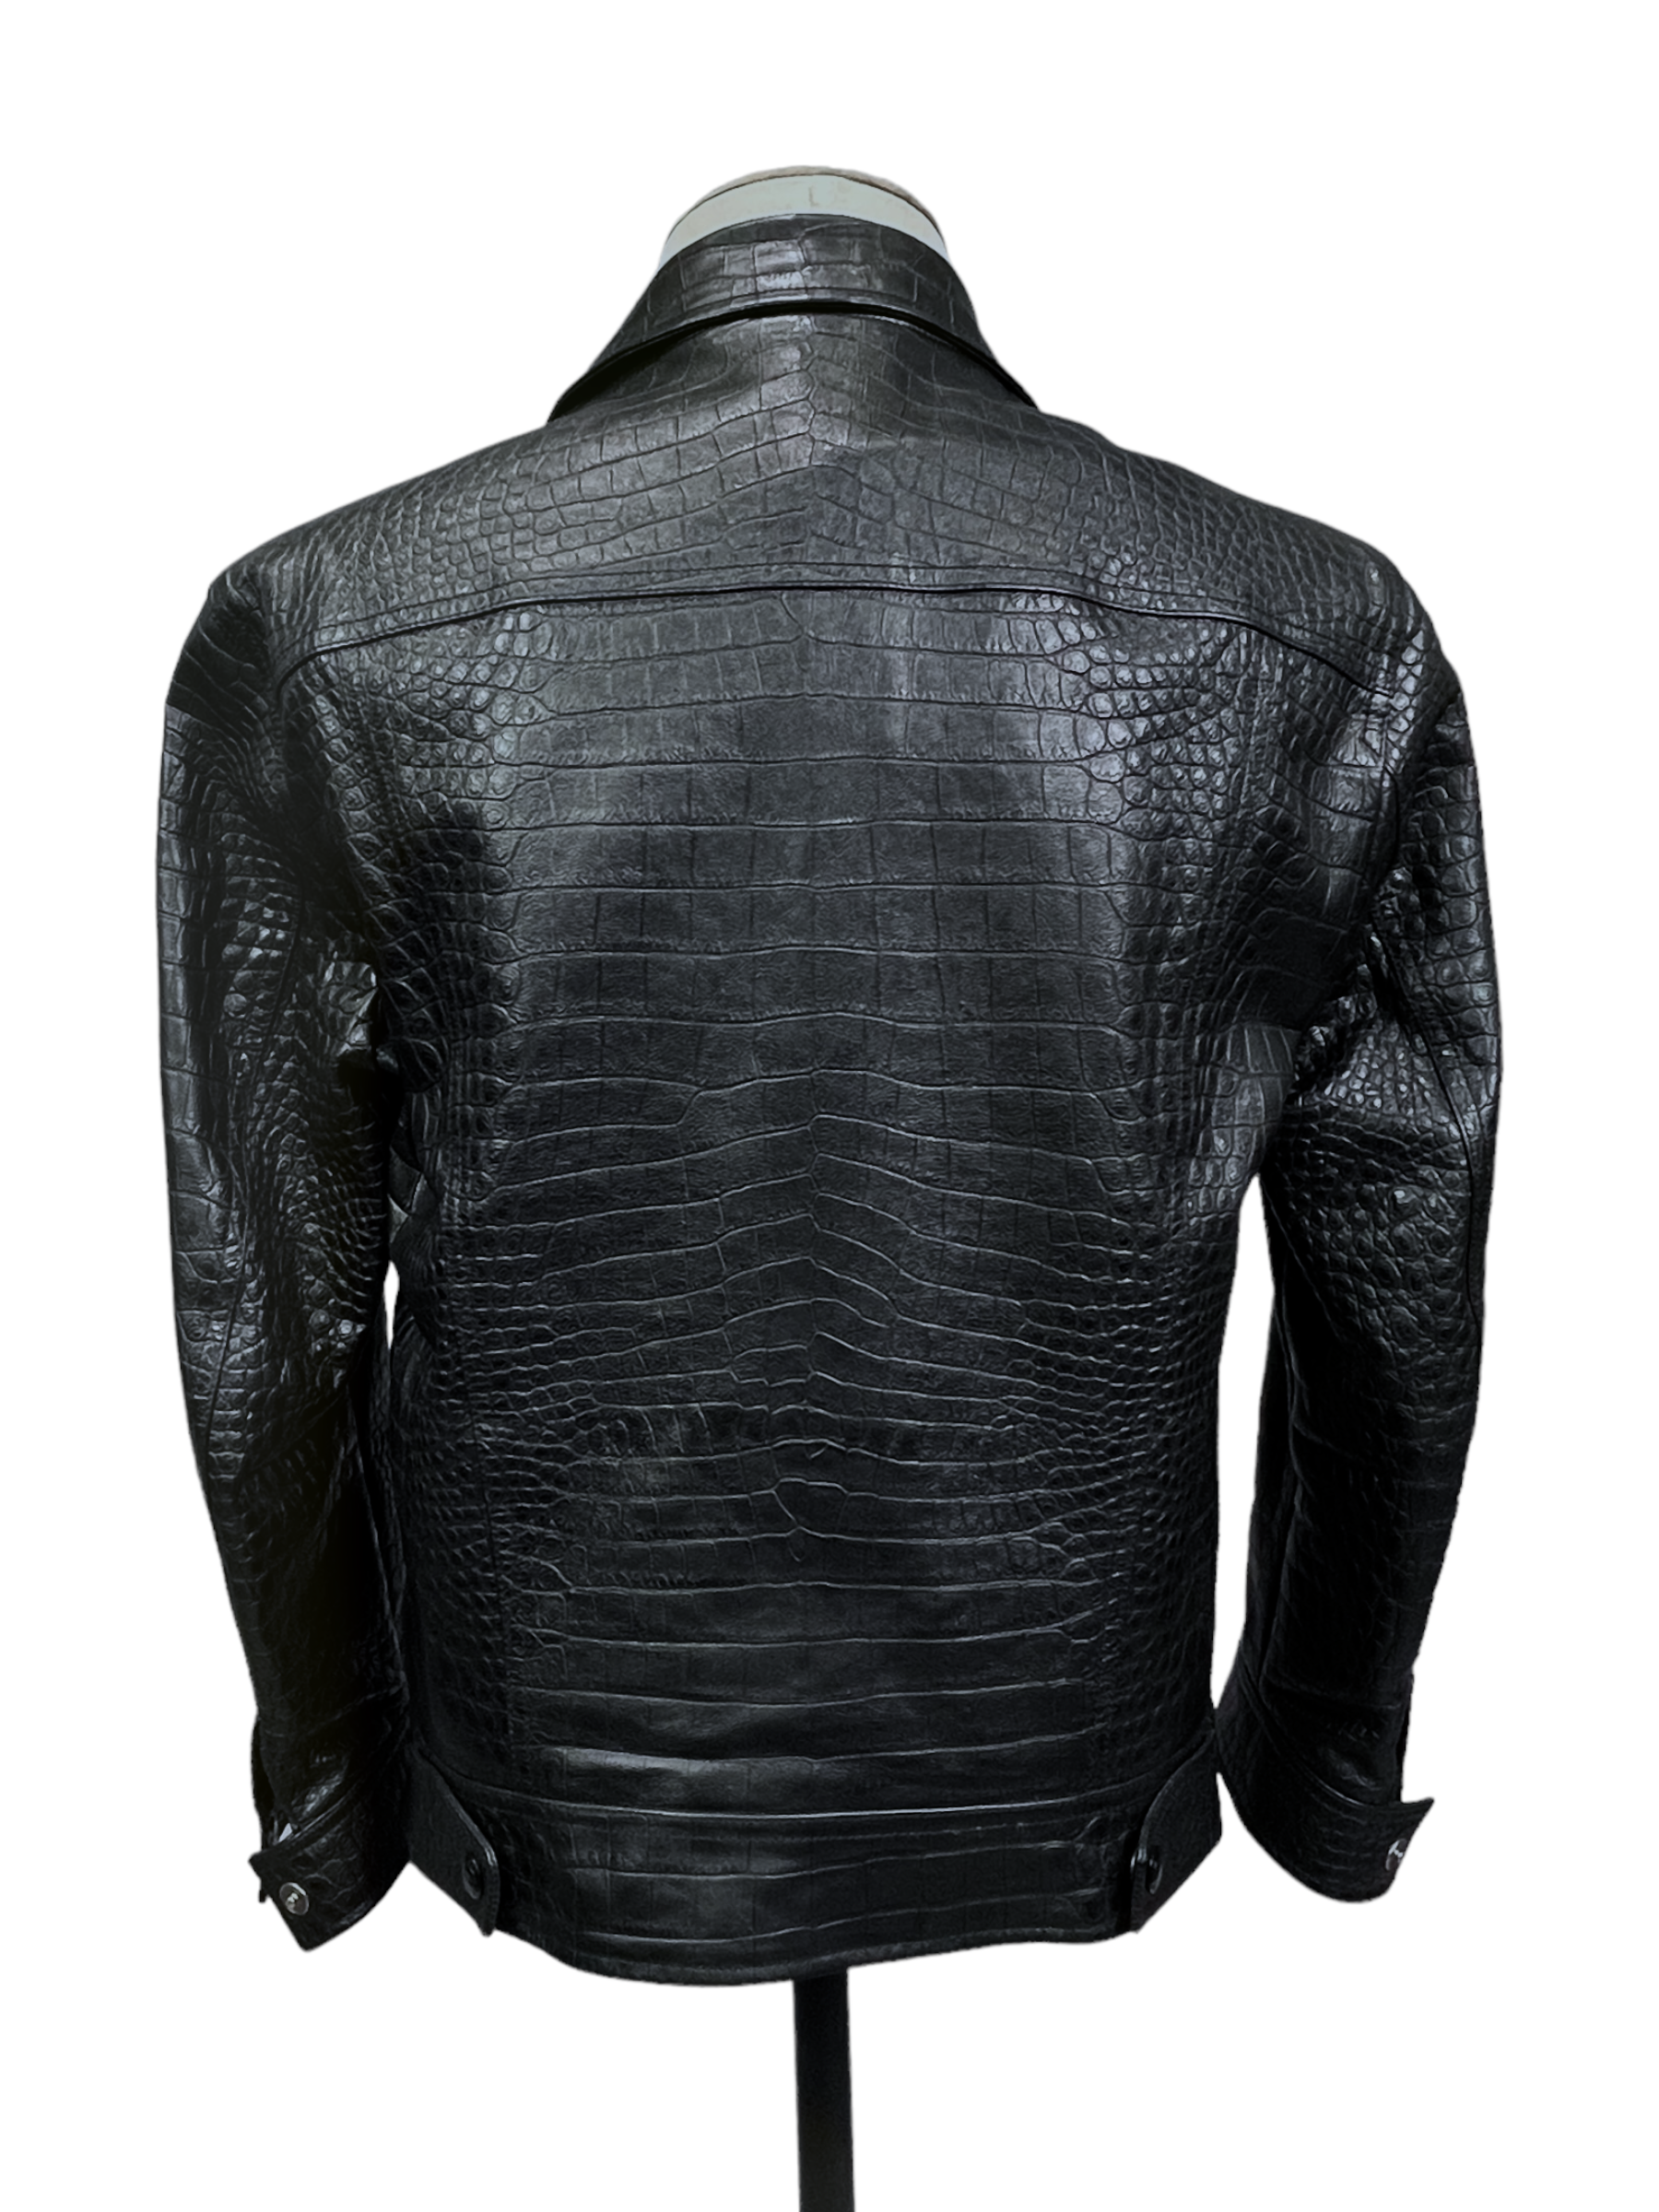 Tom Ford Black Calfskin Leather Trucker Jacket 40R — Genuine Design Luxury Consignment Calgary, Alberta, Canada New and Pre-Owned Clothing, Shoes, Accessories.